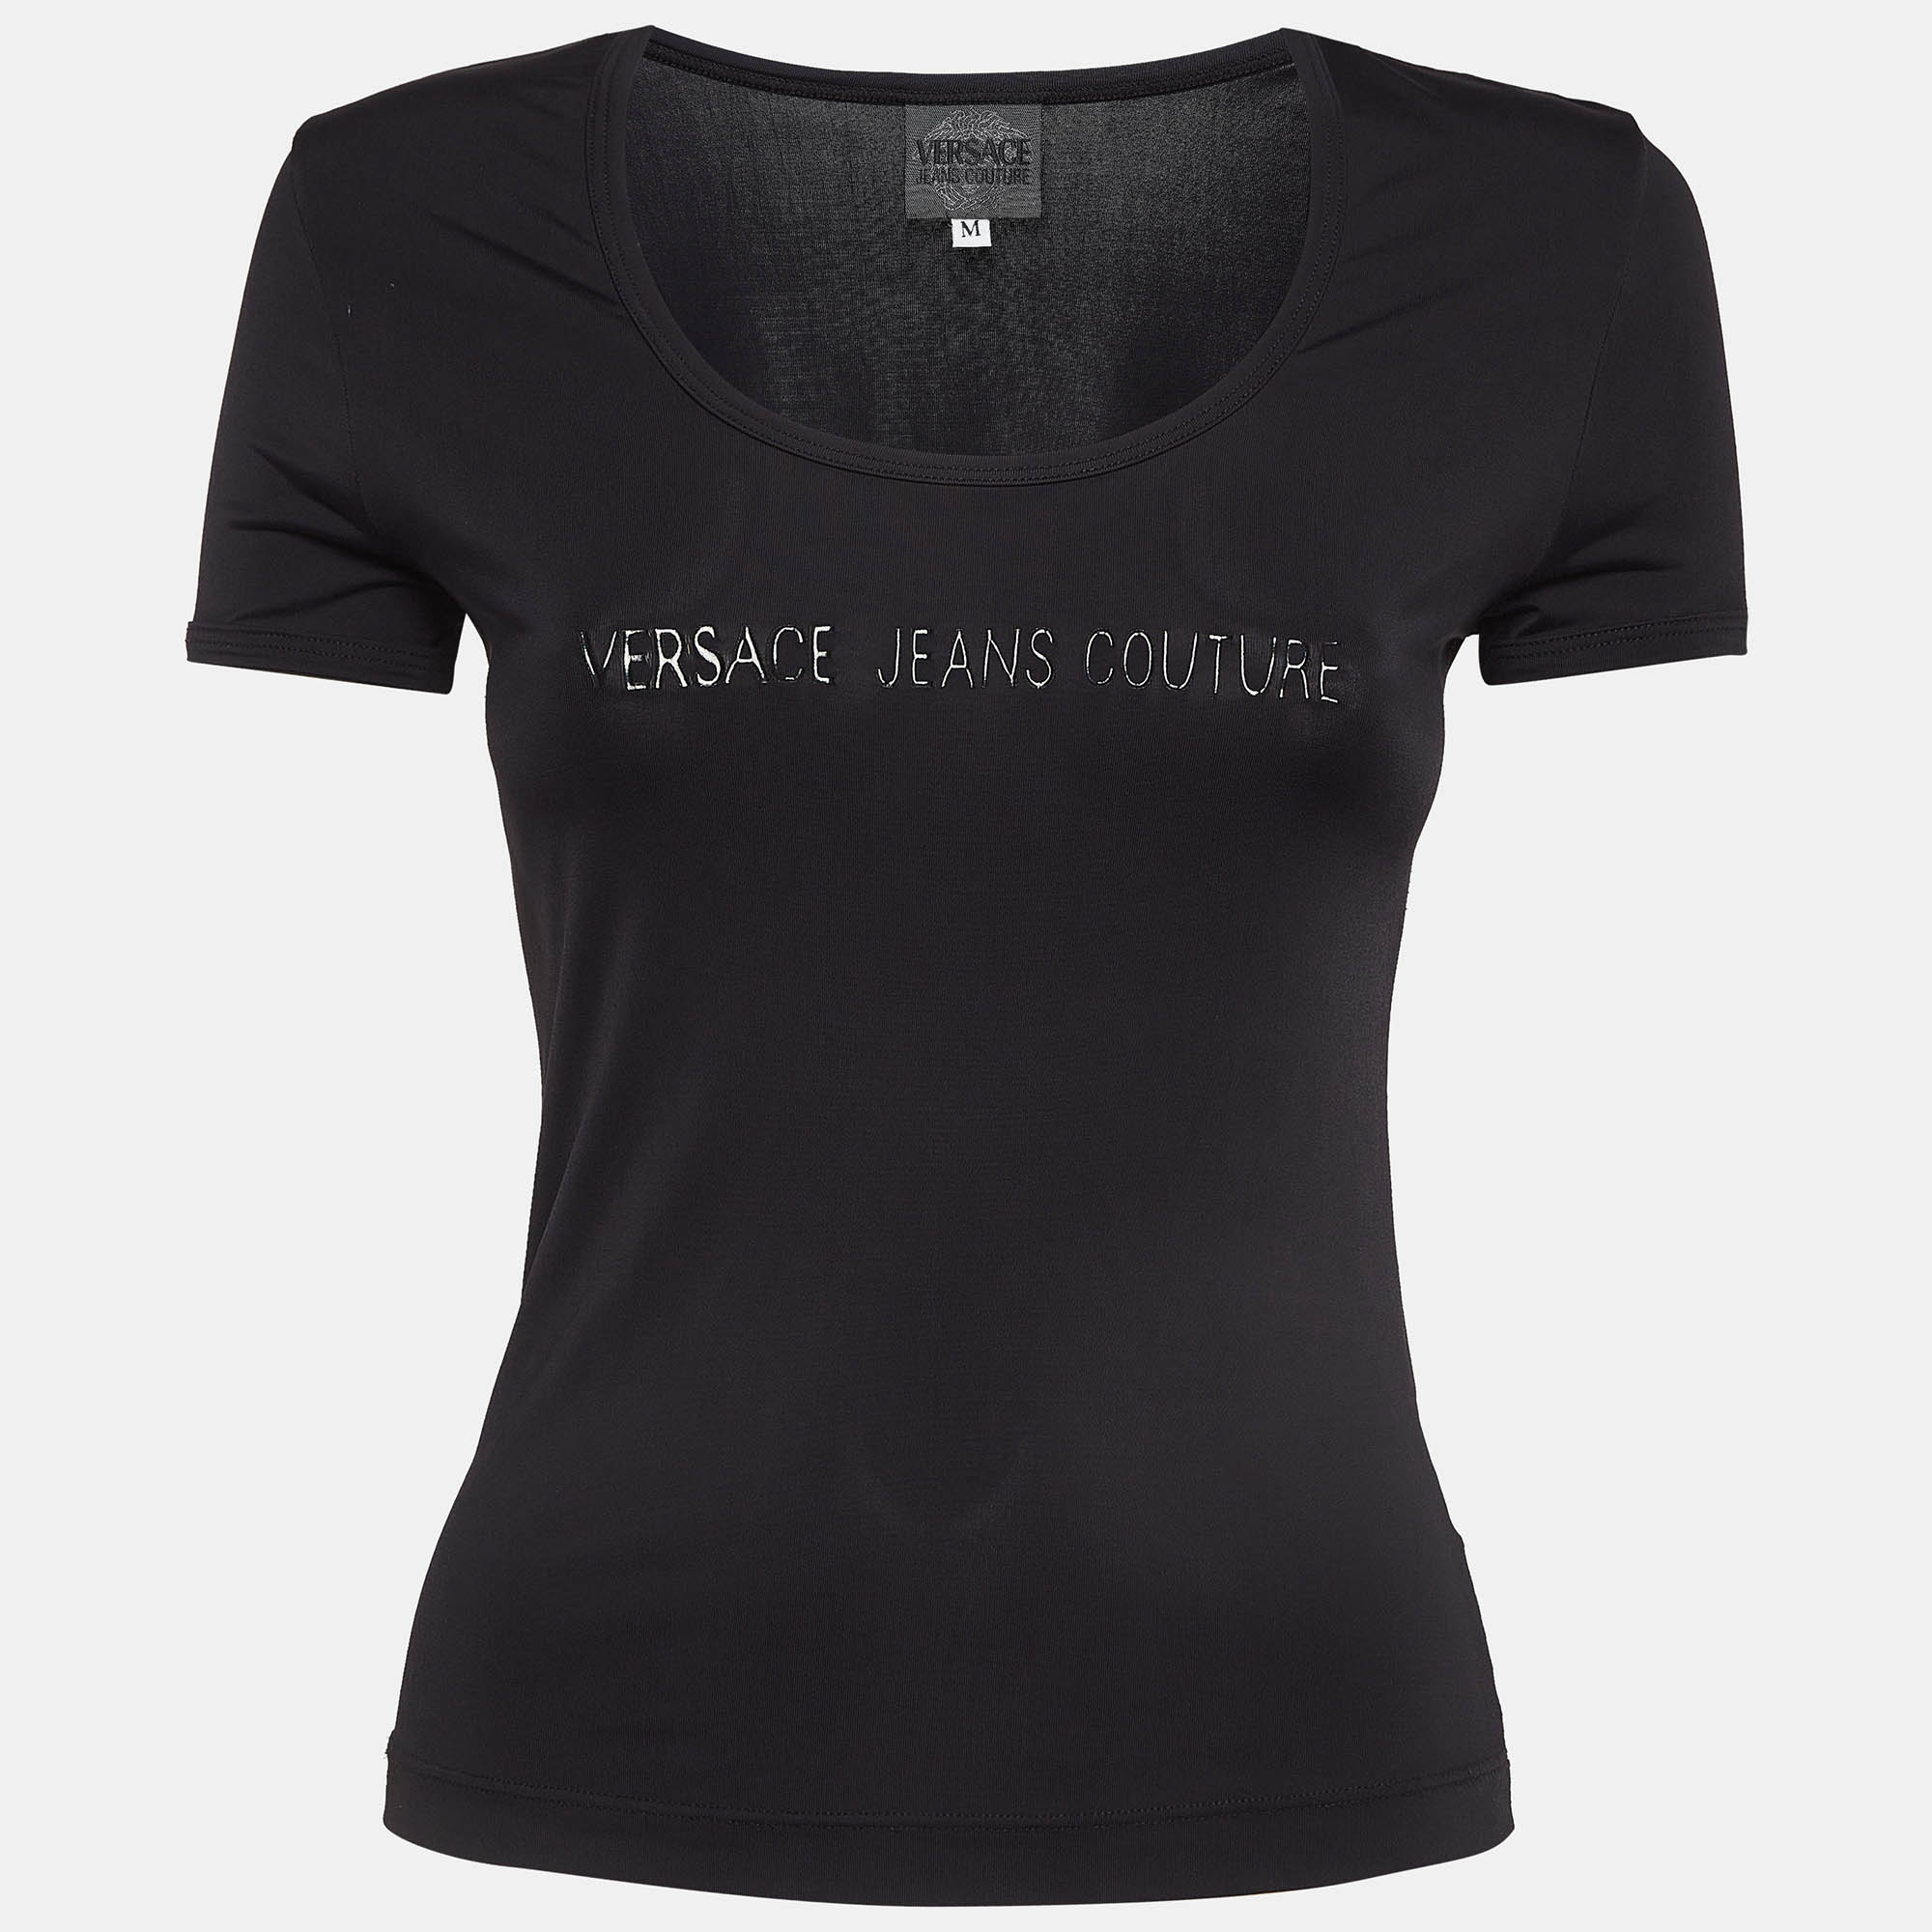 

Versace Jeans Couture Black Printed Jersey Top M